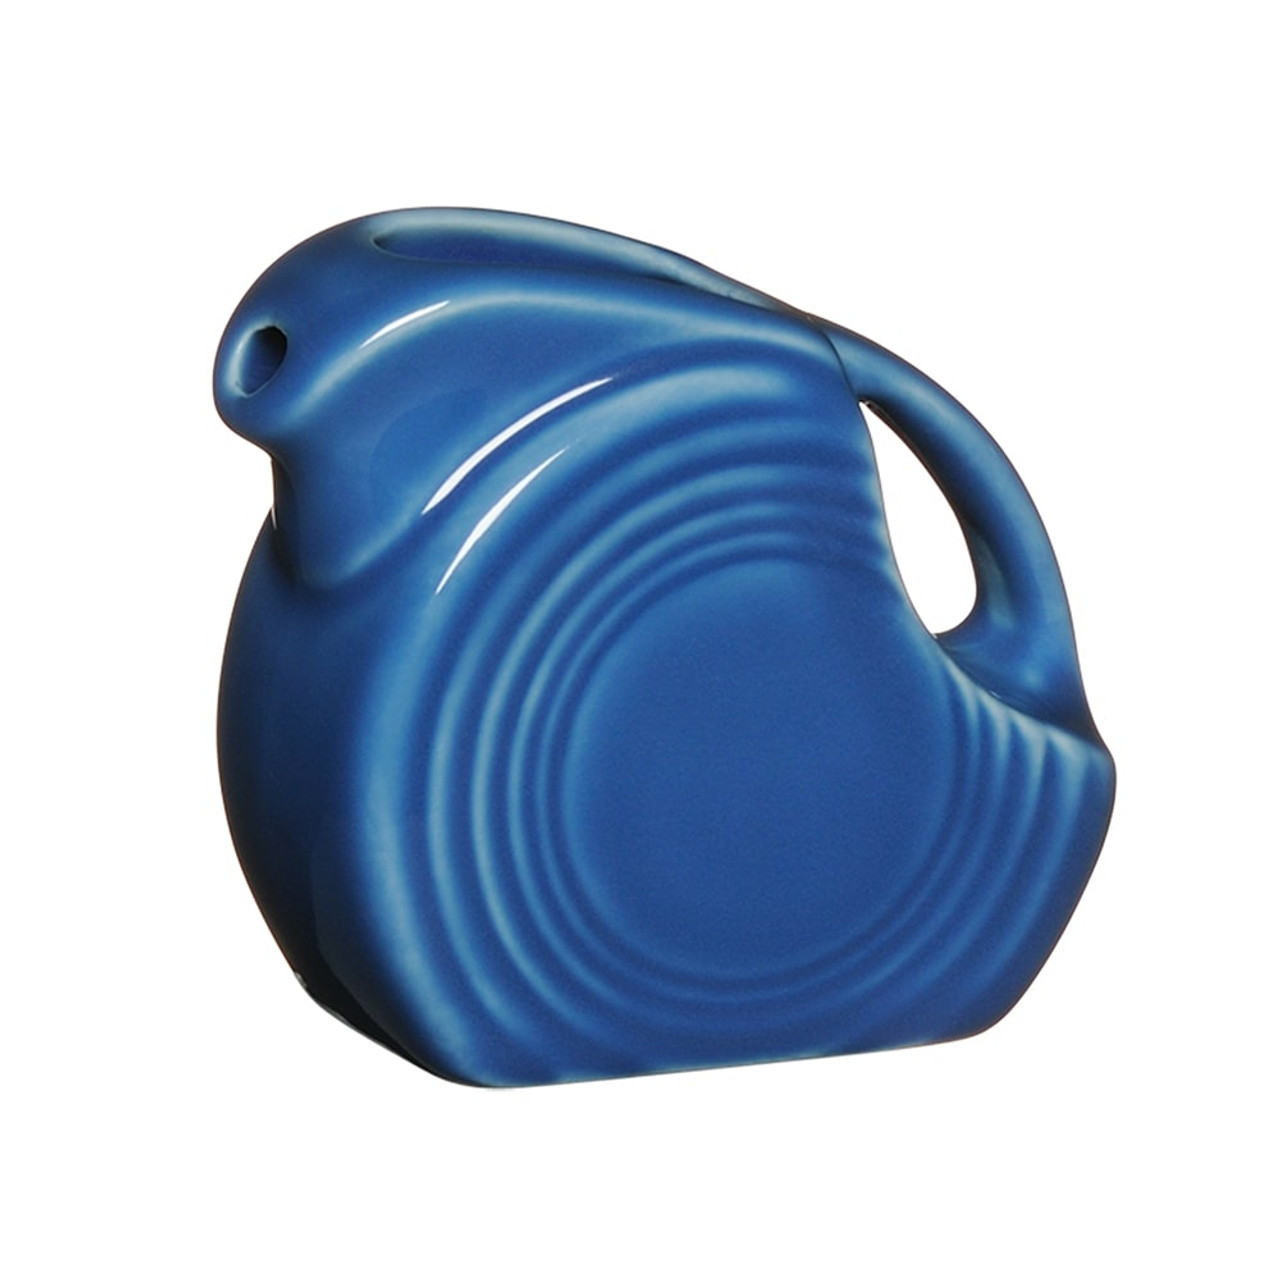 https://cdn11.bigcommerce.com/s-hccytny0od/images/stencil/1280x1280/products/4083/15177/fiesta-mini-disk-pitcher-lapis__43125.1627937353.jpg?c=2?imbypass=on